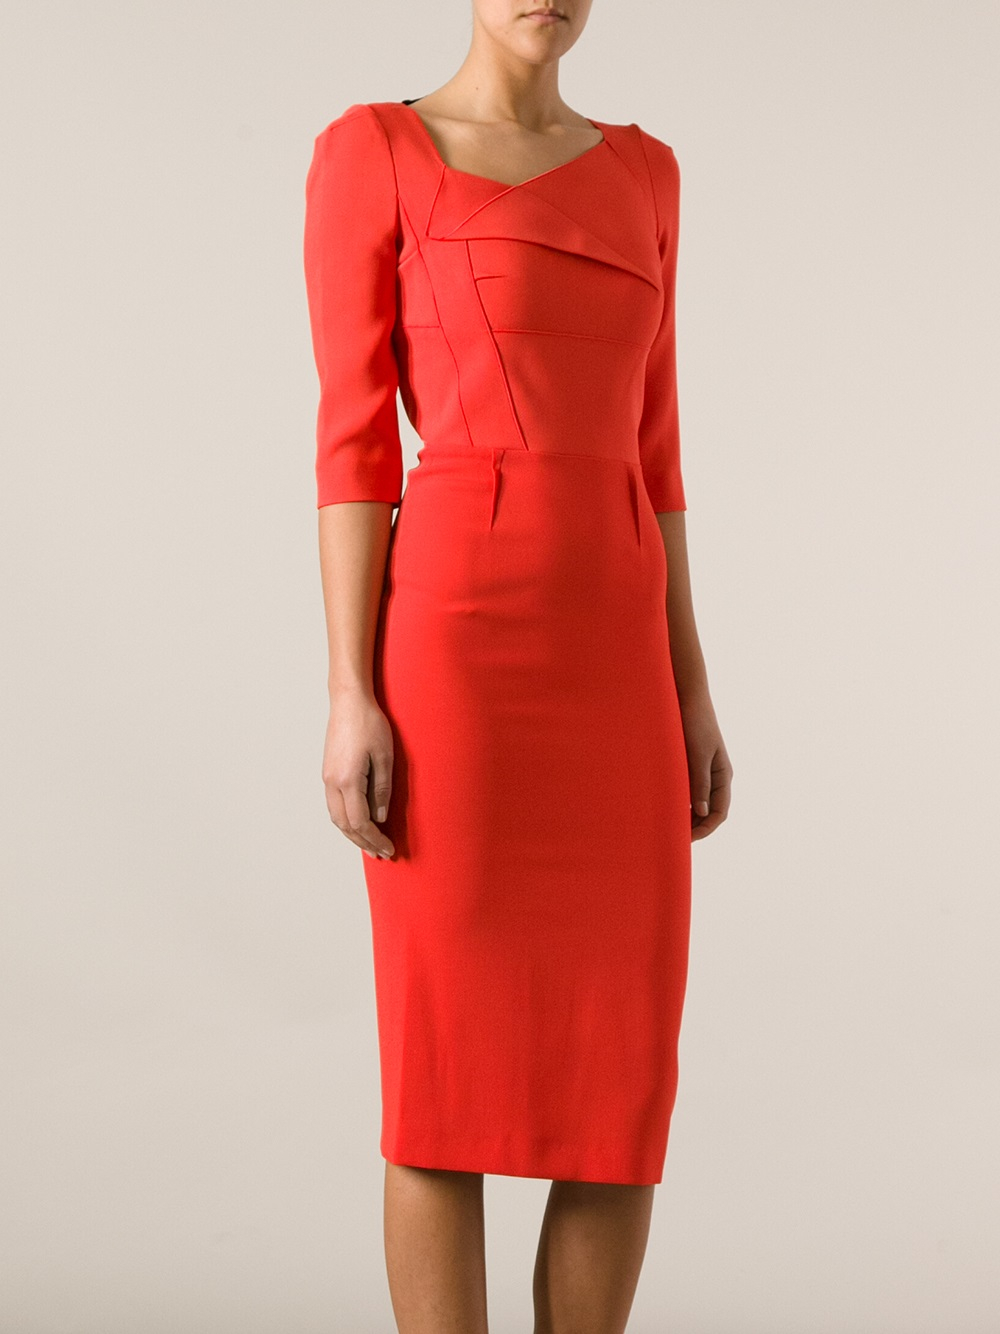 Lyst - Roland Mouret Sirius Dress in Red